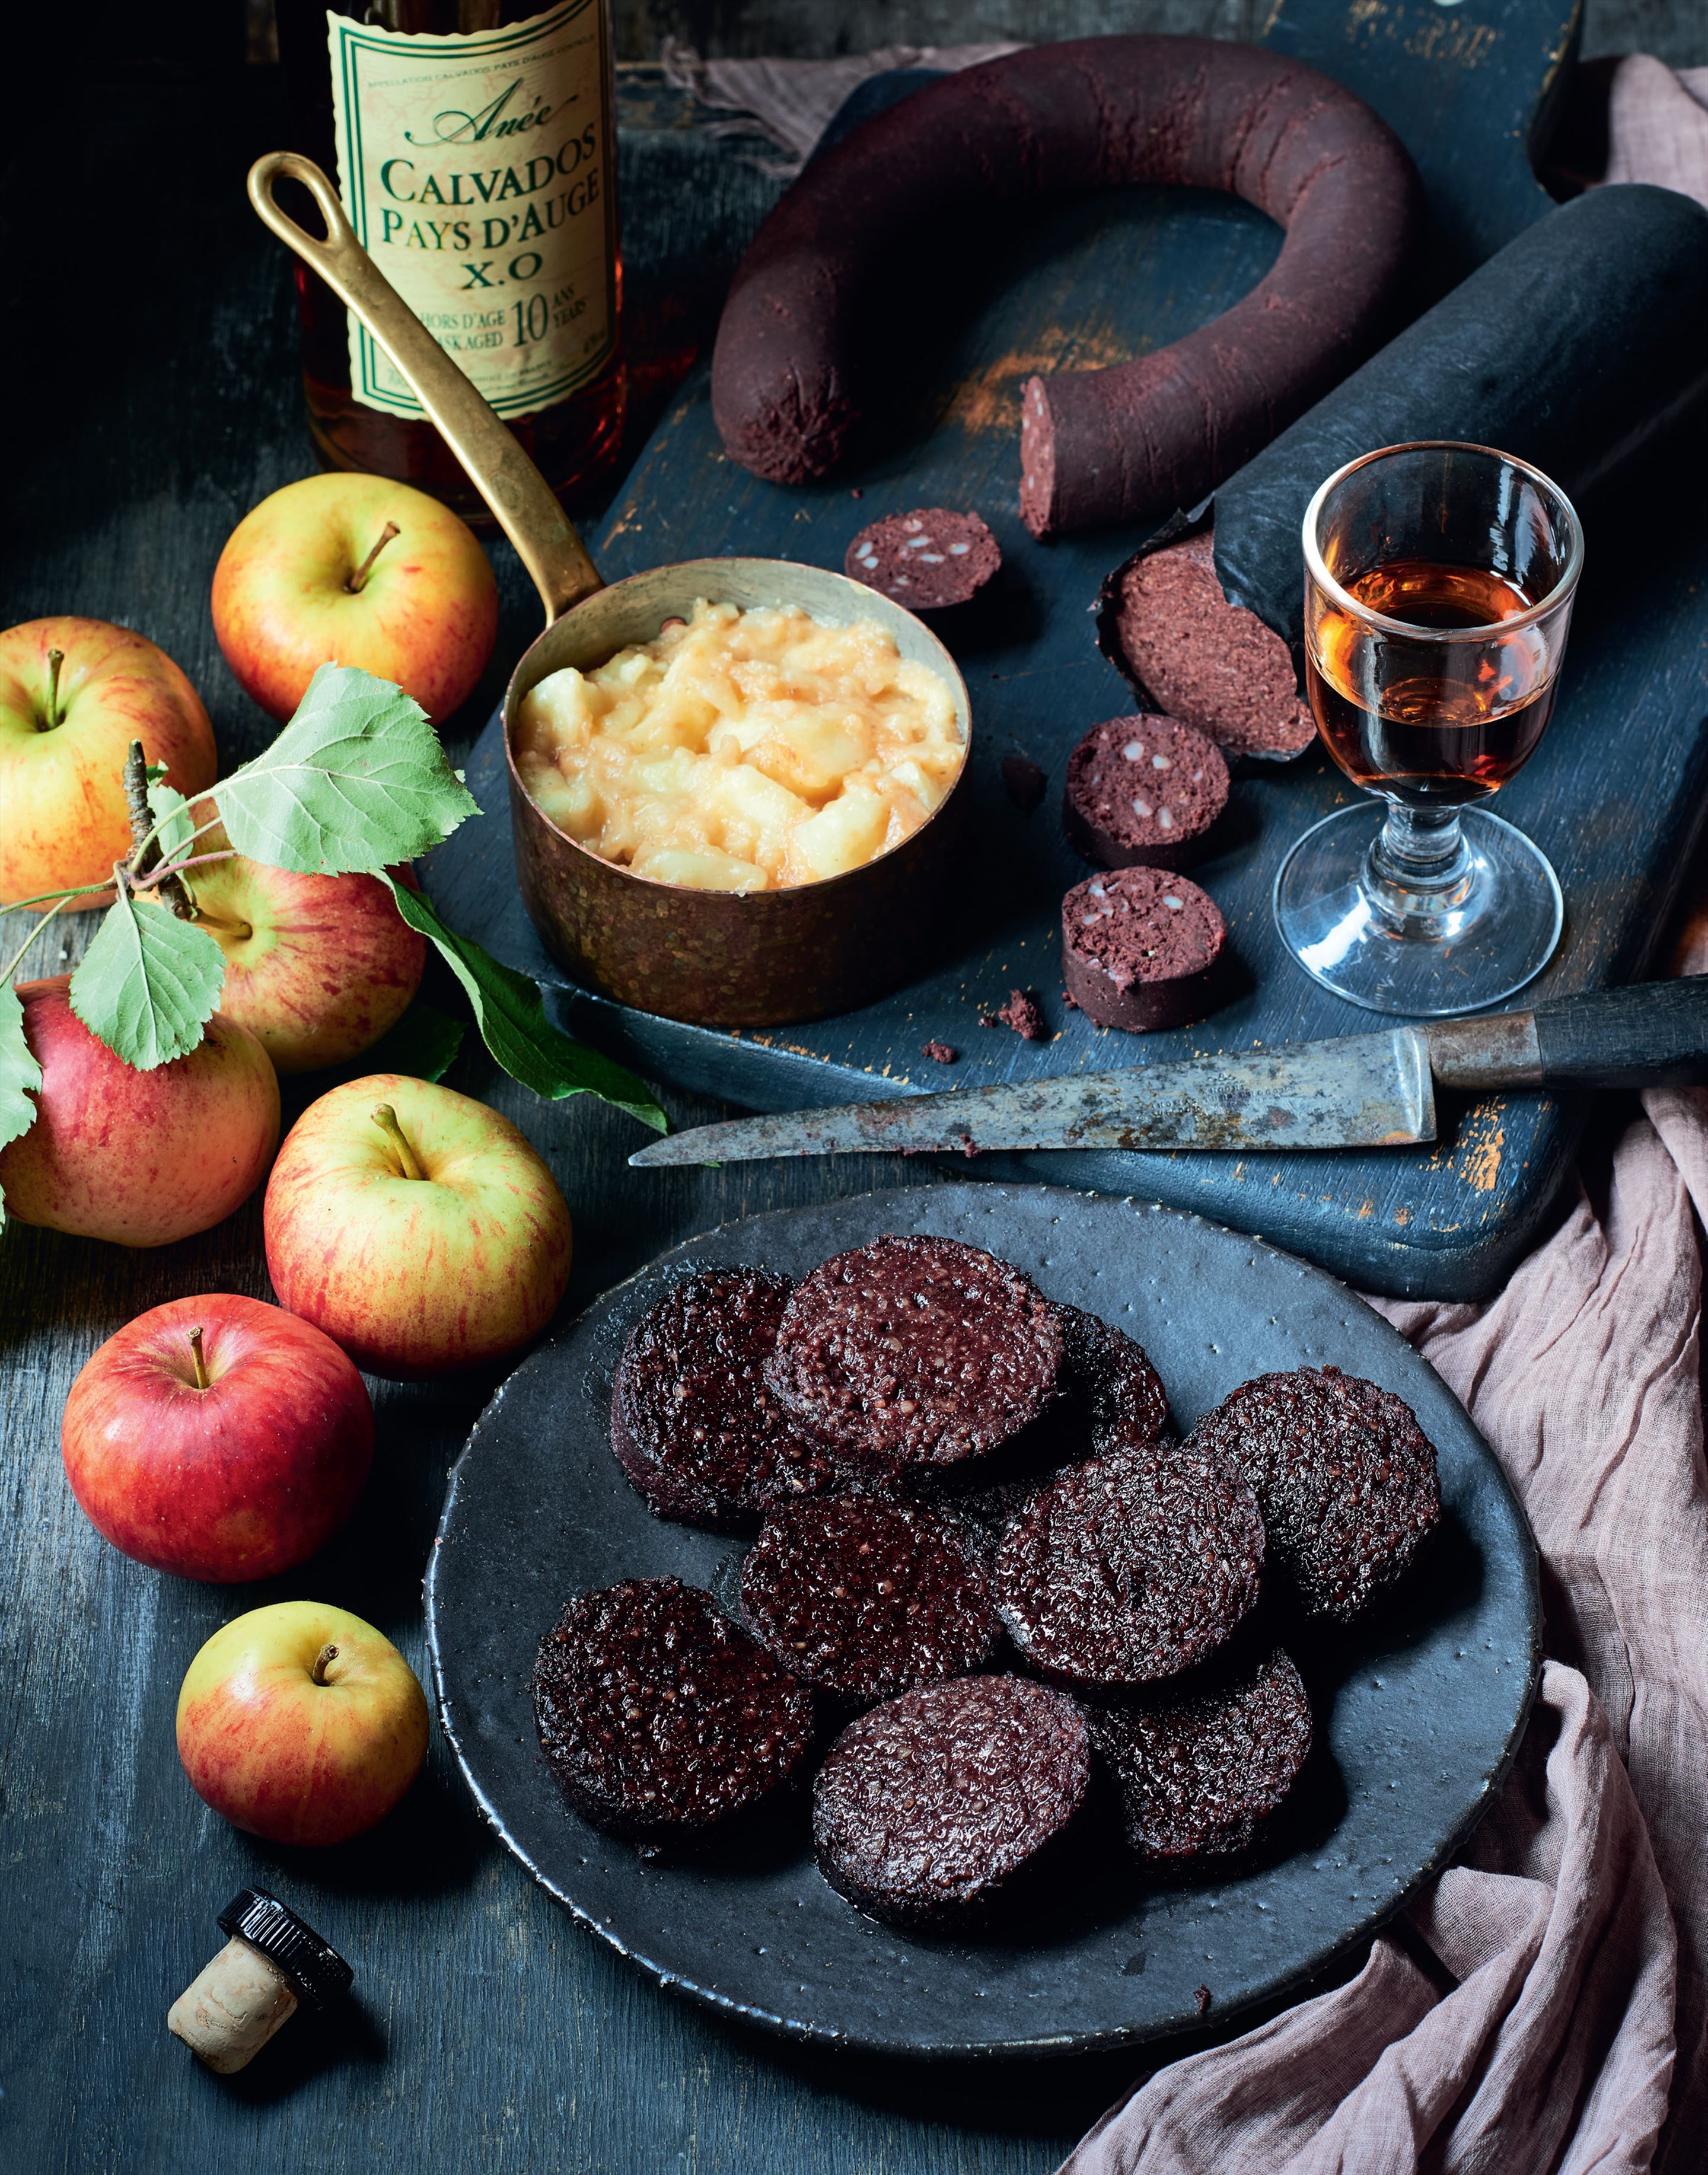 Black pudding with apples & Calvados